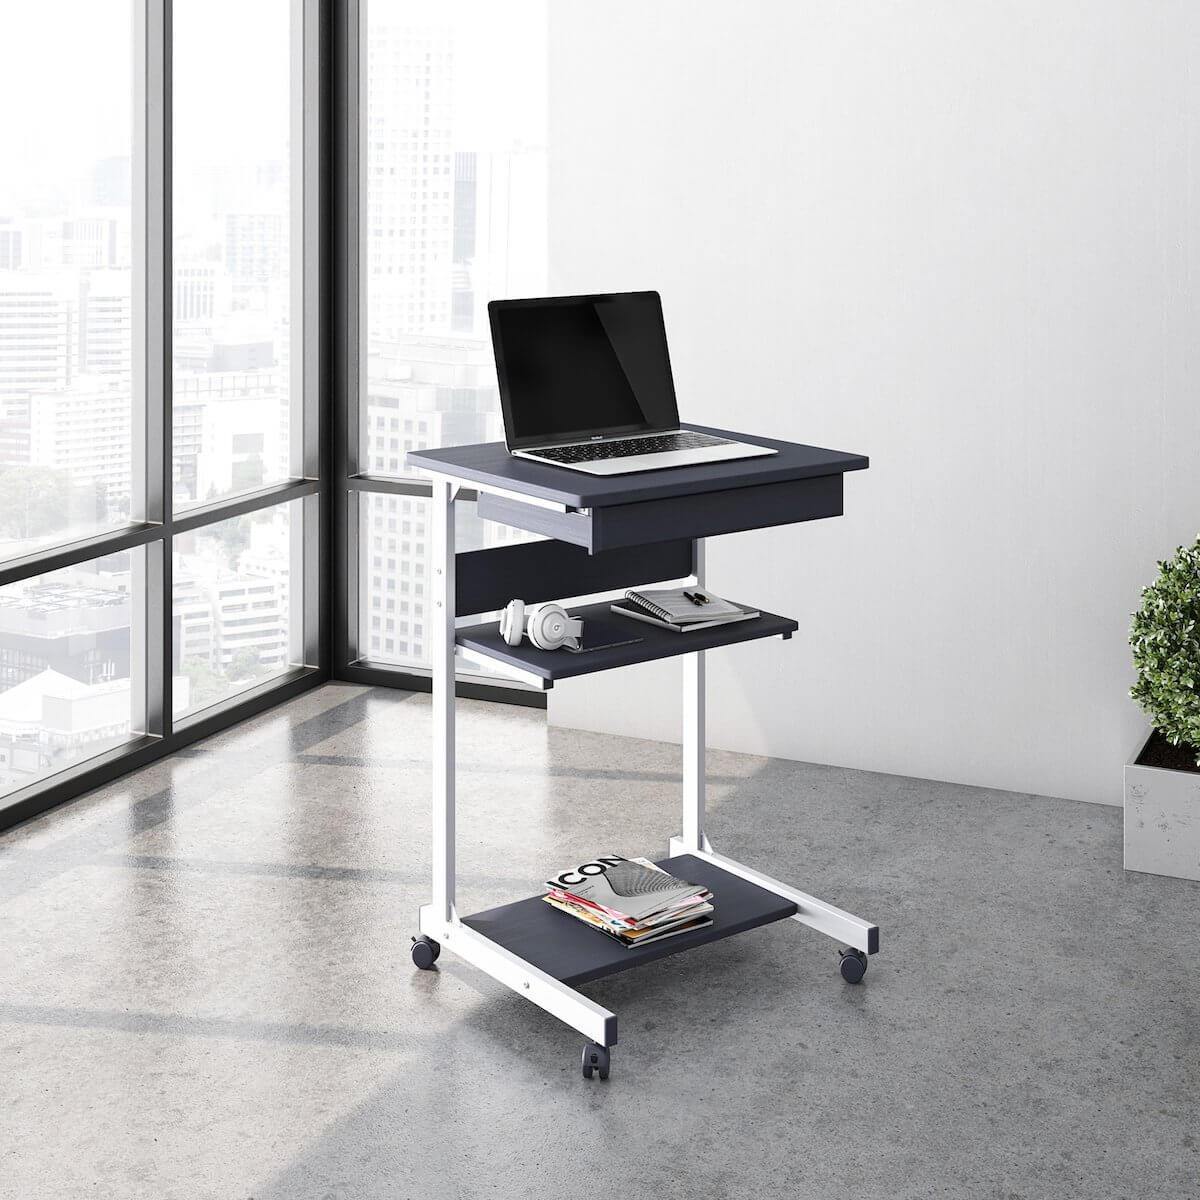 Techni Mobili Graphite Rolling Laptop Cart with Storage RTA-B018-GPH06 in Office